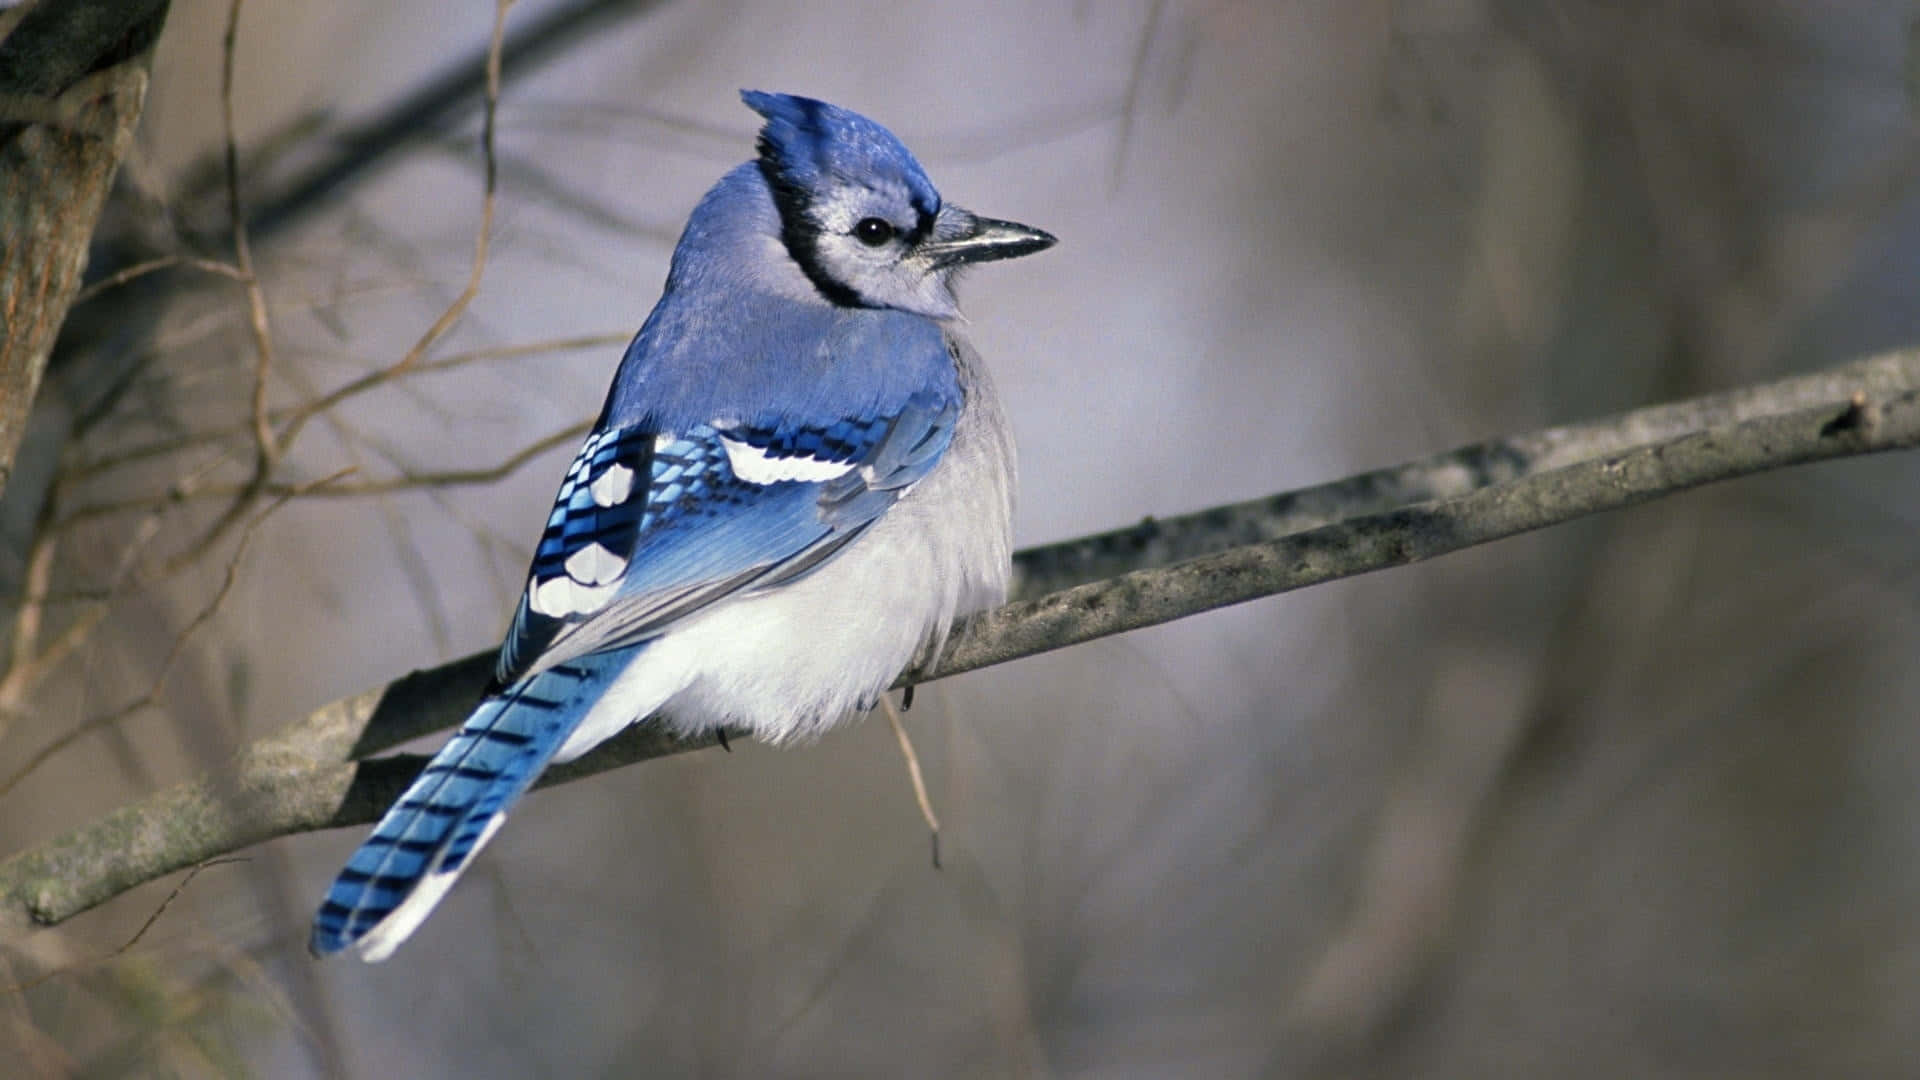 A beautiful blue jay perched on a tree branch in its colorful plumage.